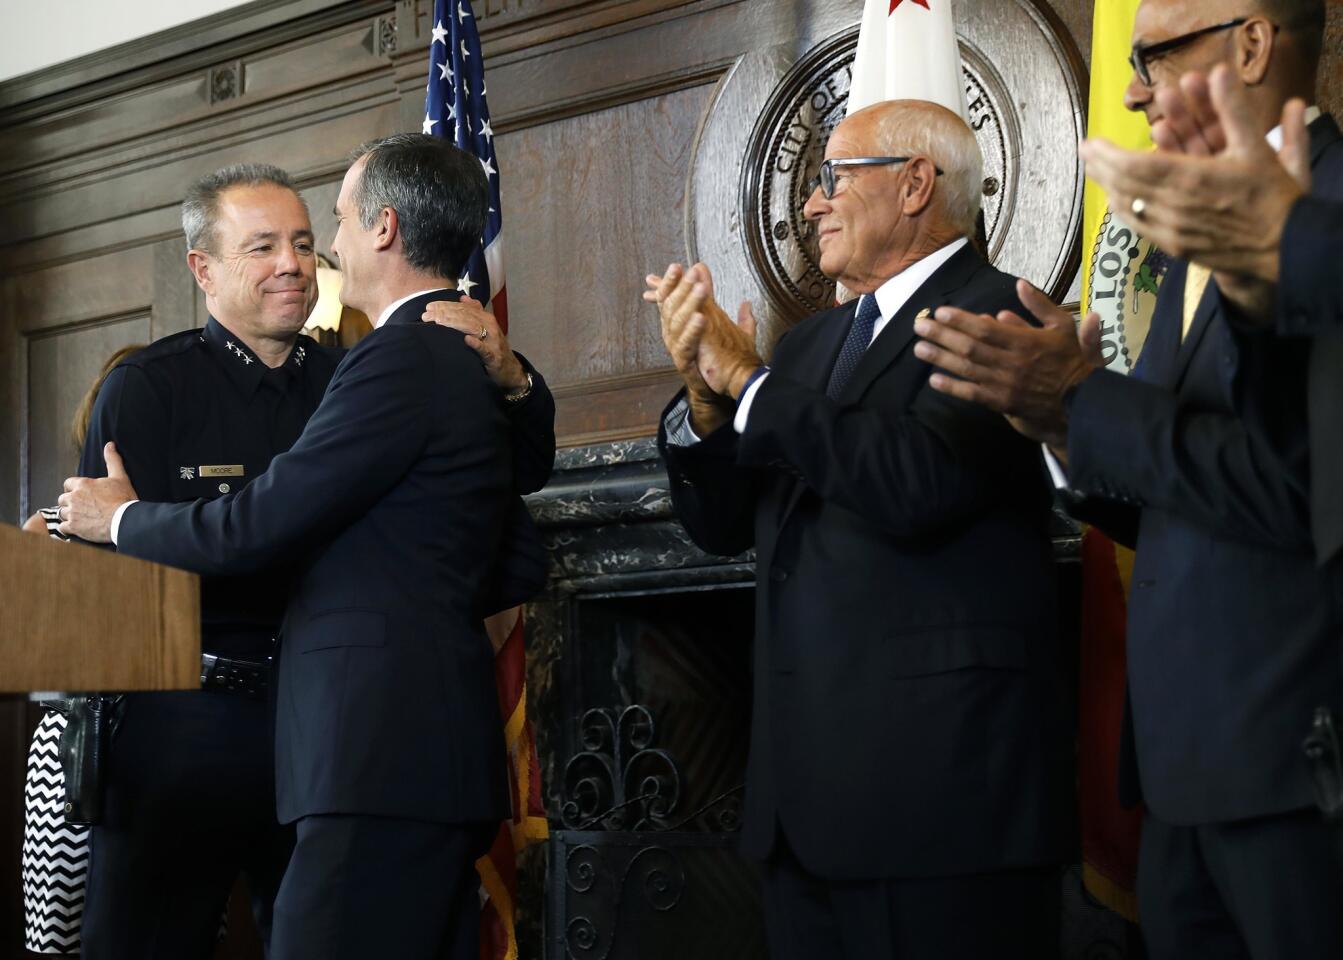 Los Angeles Mayor Eric Garcetti announces LAPD Assistant Chief Michel Moore, left, as his choice to succeed Police Chief Charlie Beck, whose last day is June 27. Moore bested dozens of candidates for the position, including two other finalists with experience at the department.